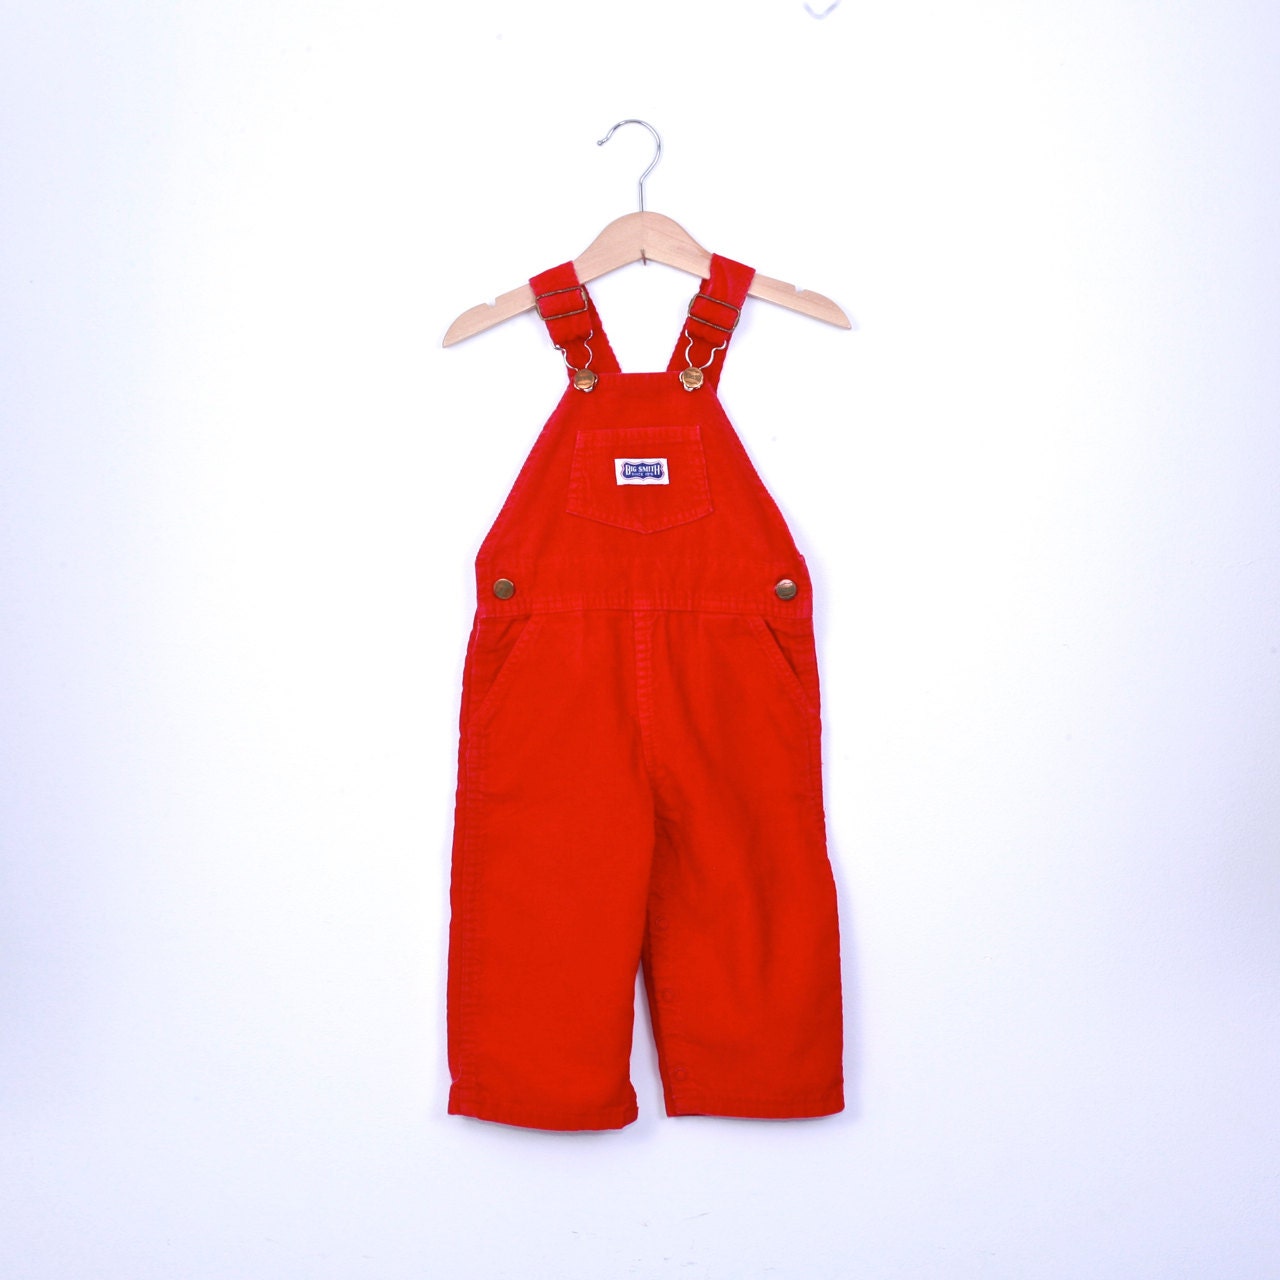 Vintage Overalls Dungarees in Red Corduroy by Big Smith - udaskids